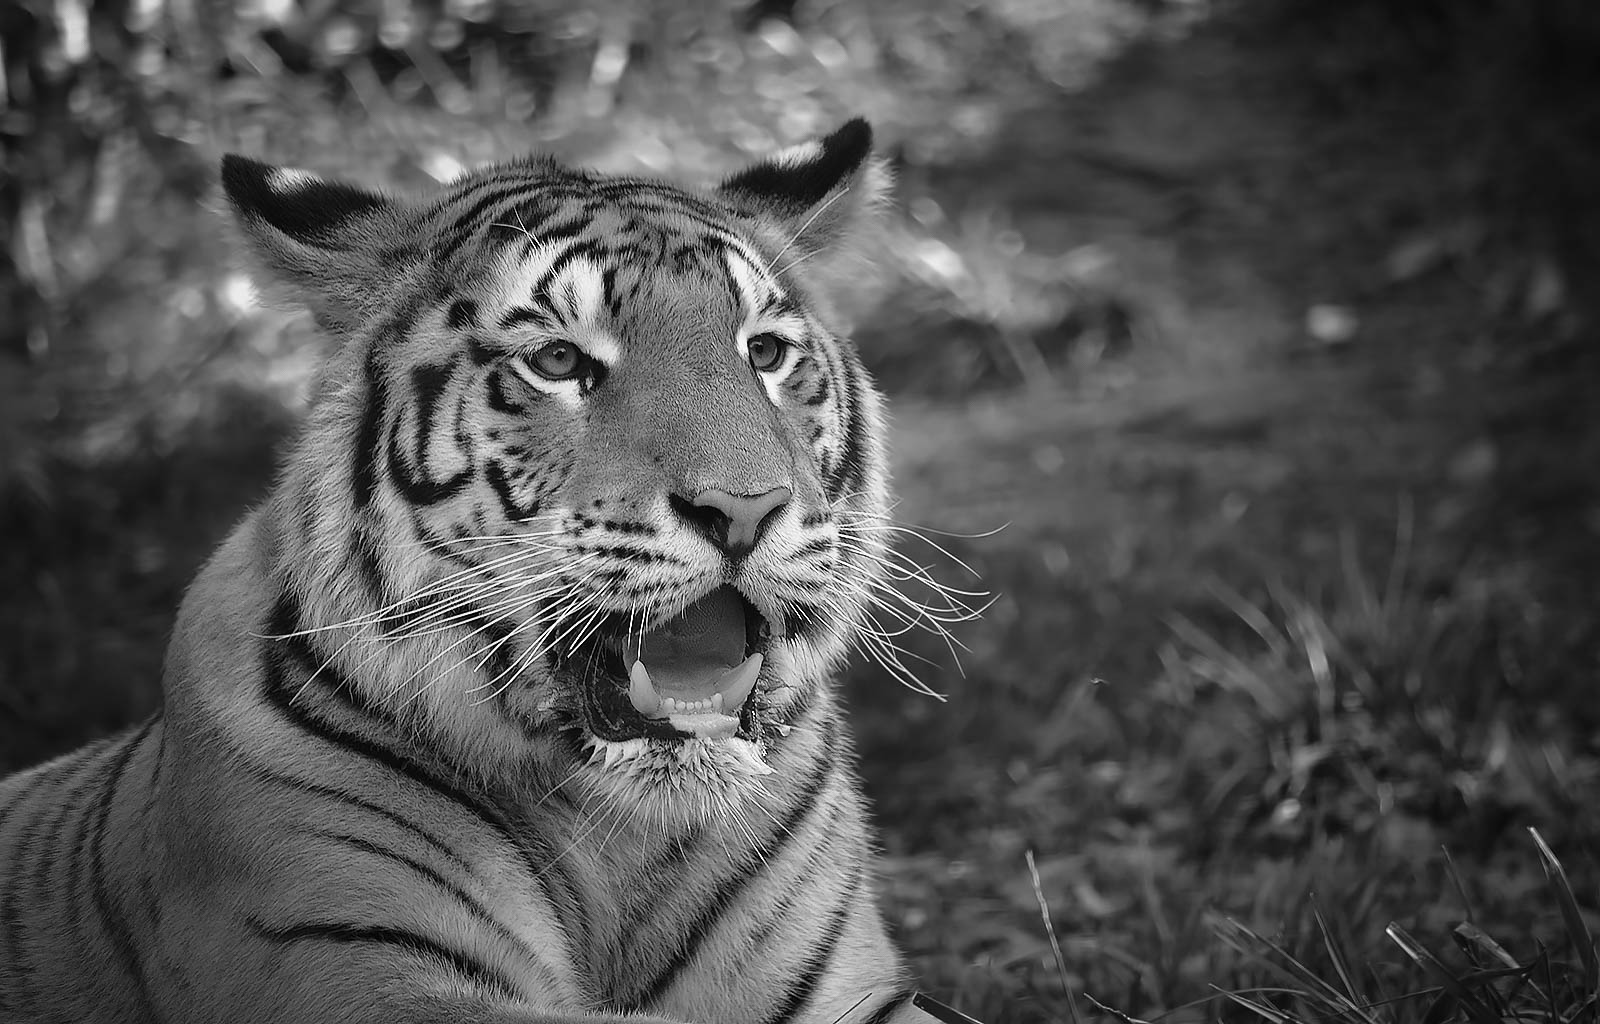 Young tiger - BW